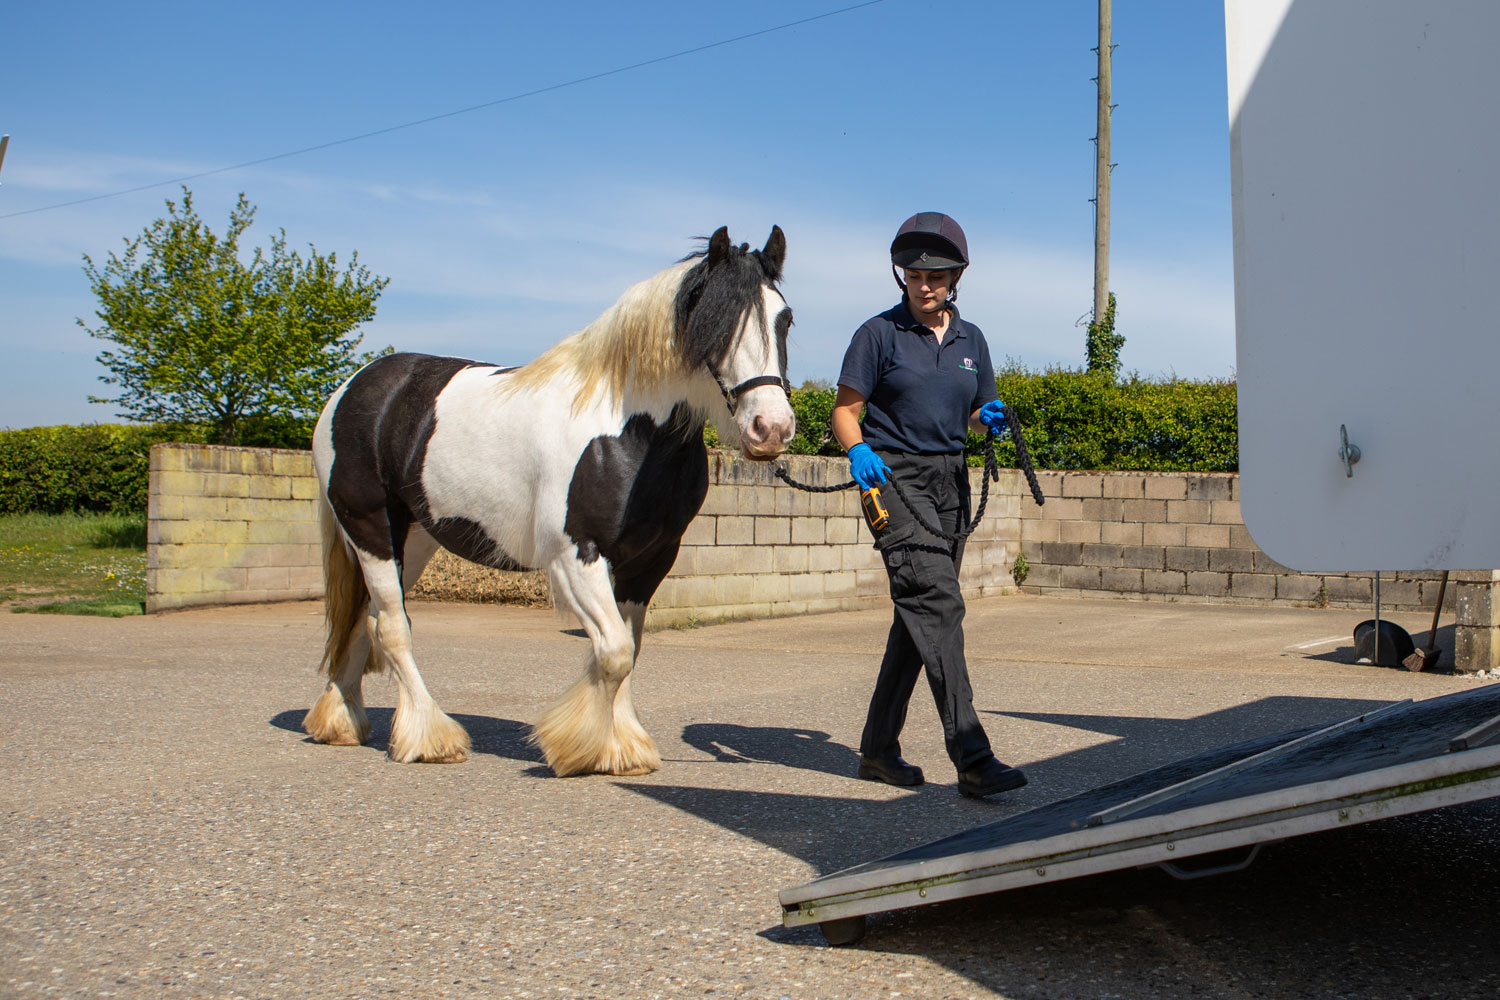 Transporting your horse safely